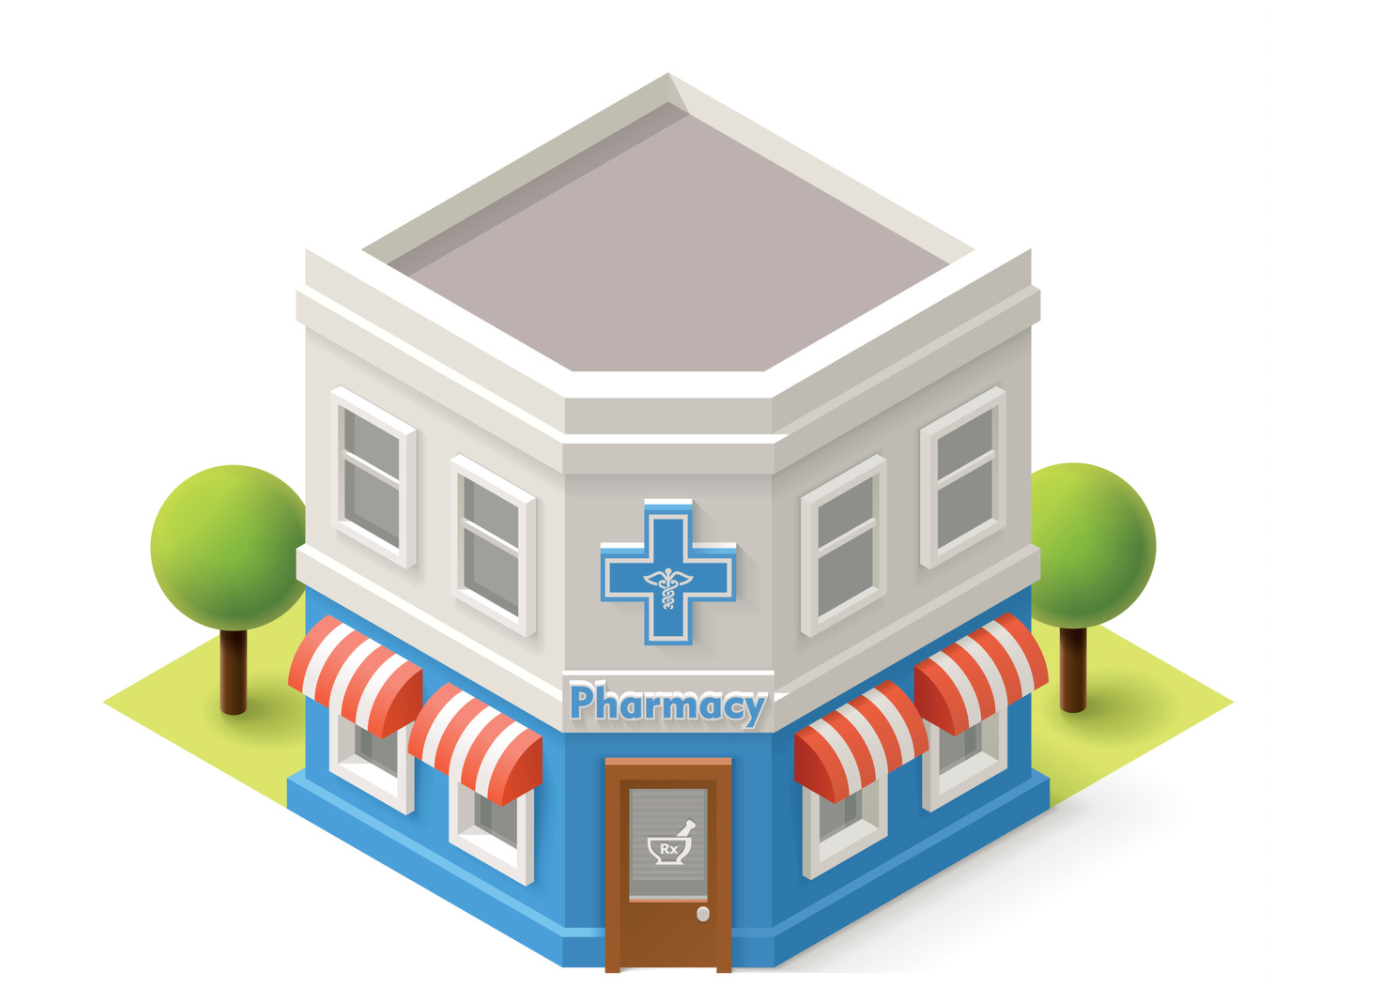 What’s Next in Health Care: How Pharmacies Can Help Serve Their Communities Better